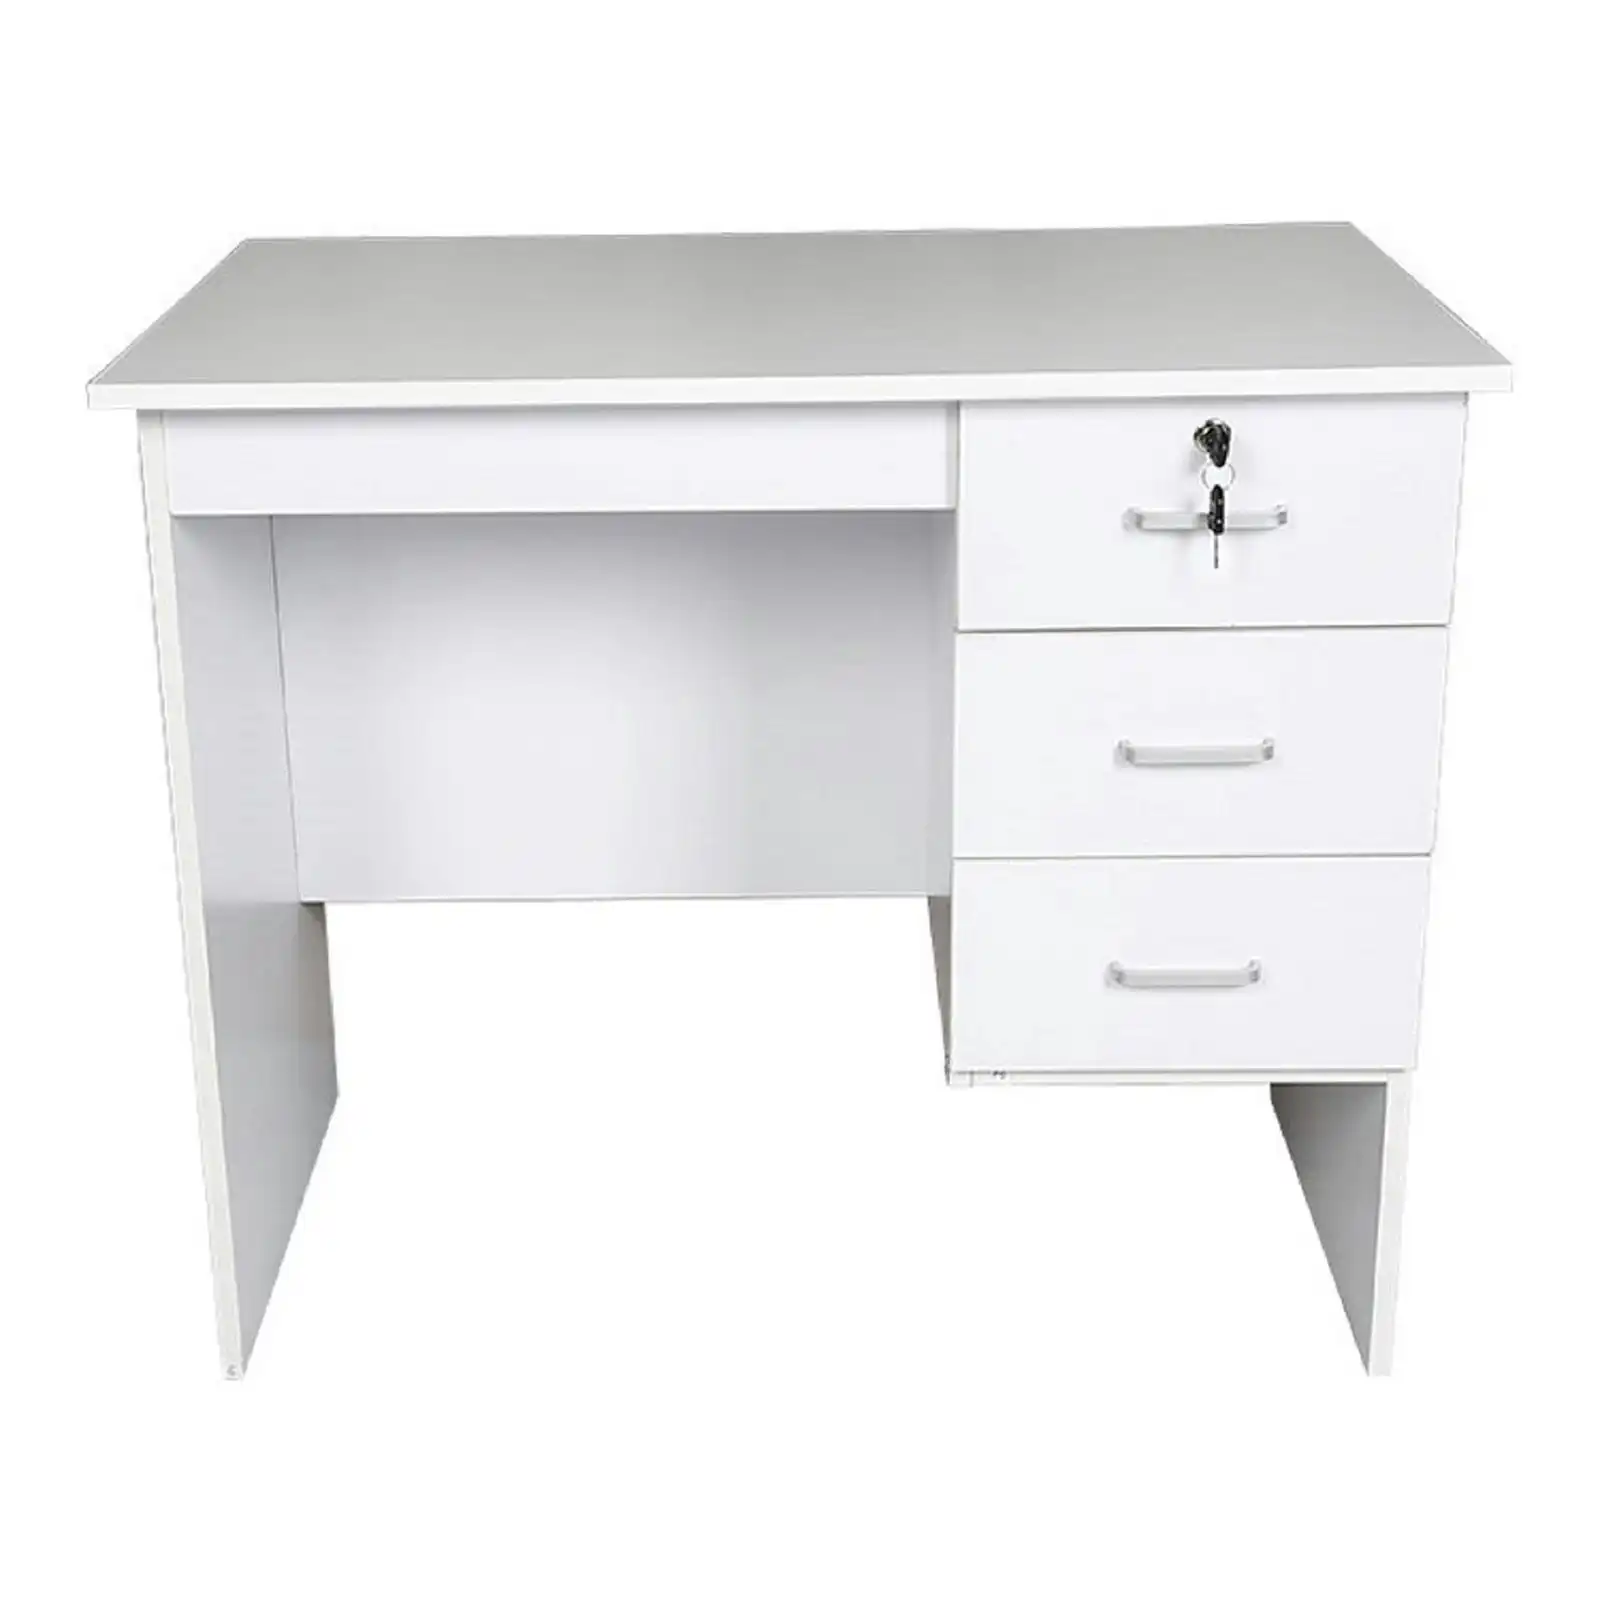 HEQS Redfern 1.2 M Study Desk with 3 Drawers White